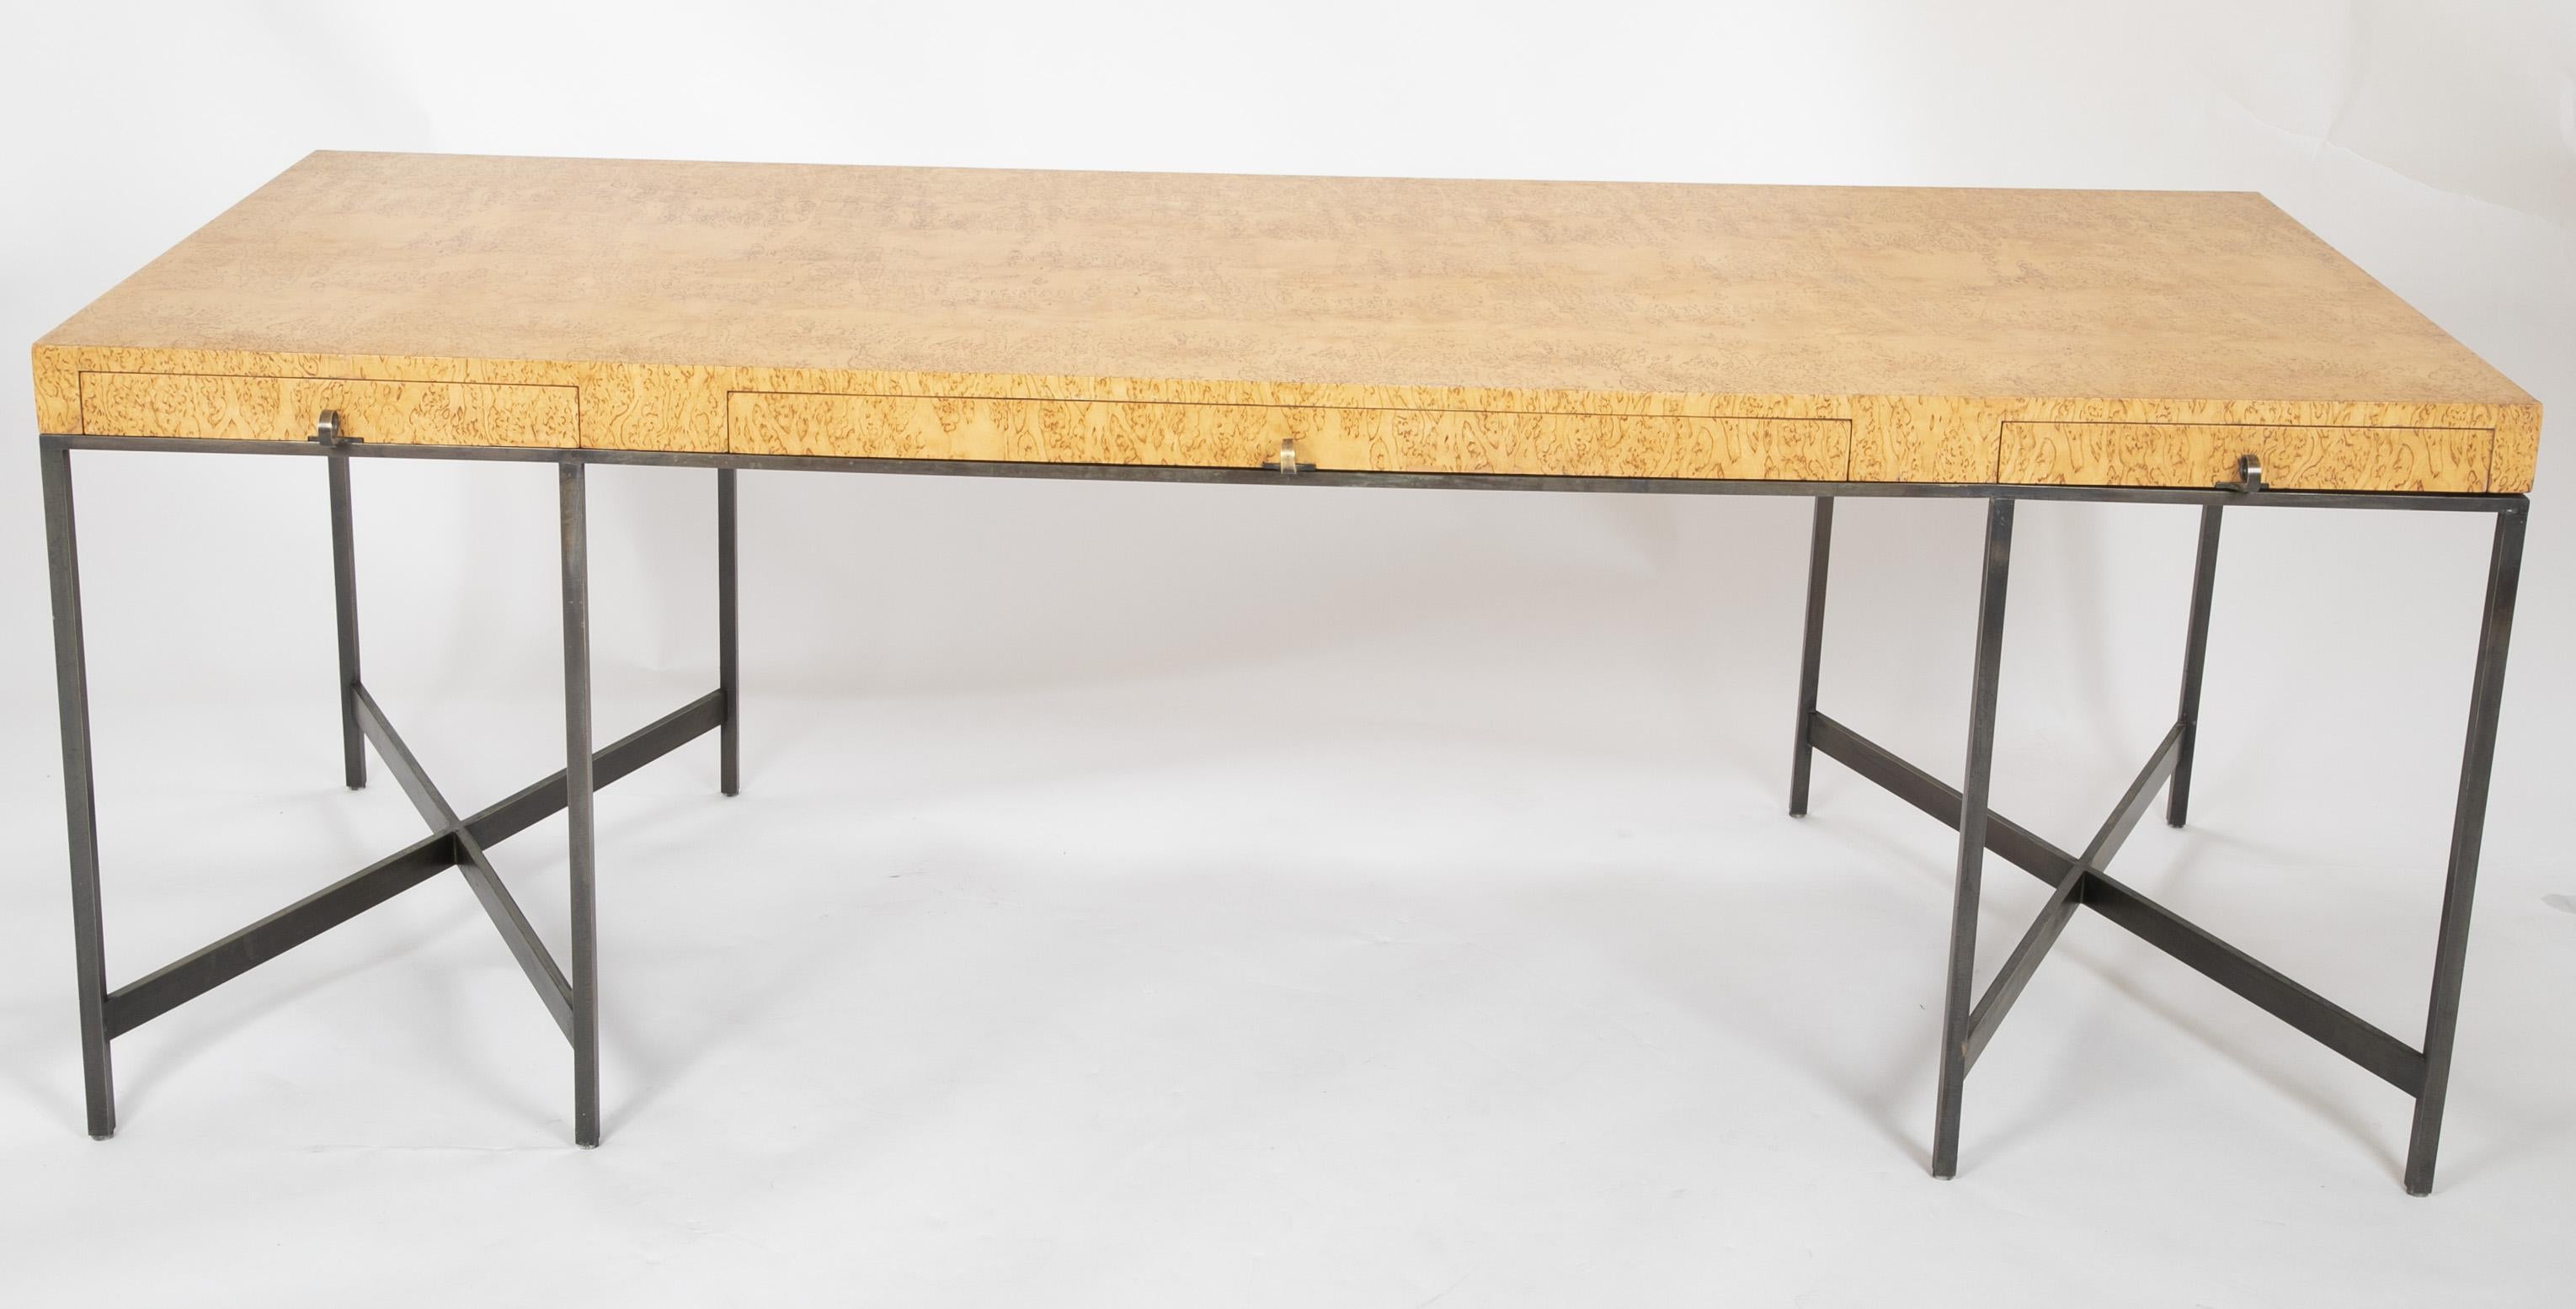 A rare Karelian birch burl desk. By repute a custom design by Edward Wormley for Dunbar. Desk rises on X-form bronze base with hand forged curled pulls.

 